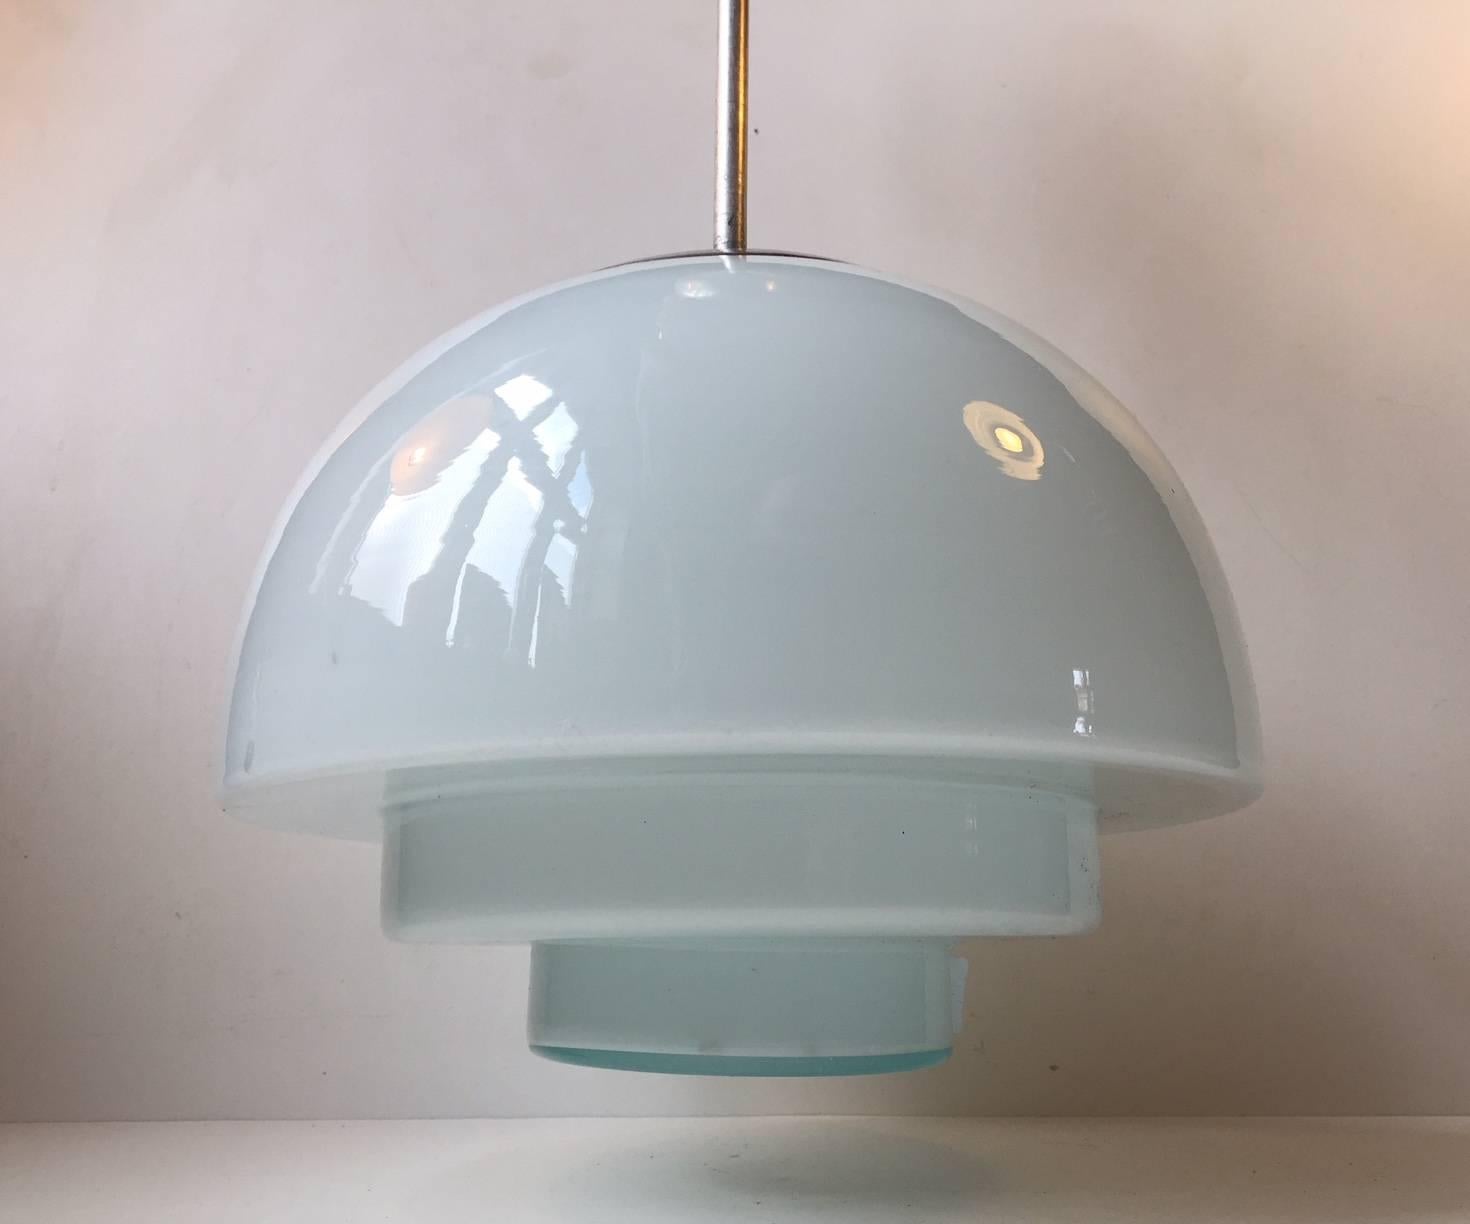 This Scandinavian Art Deco ceiling light was produced in the late 1930s or early 1940s in the style reminiscent of Peter Behrens, Otto Müller and Louis Poulsen. The opaline glass shade is fitted with its original stem, canopy, and mount in